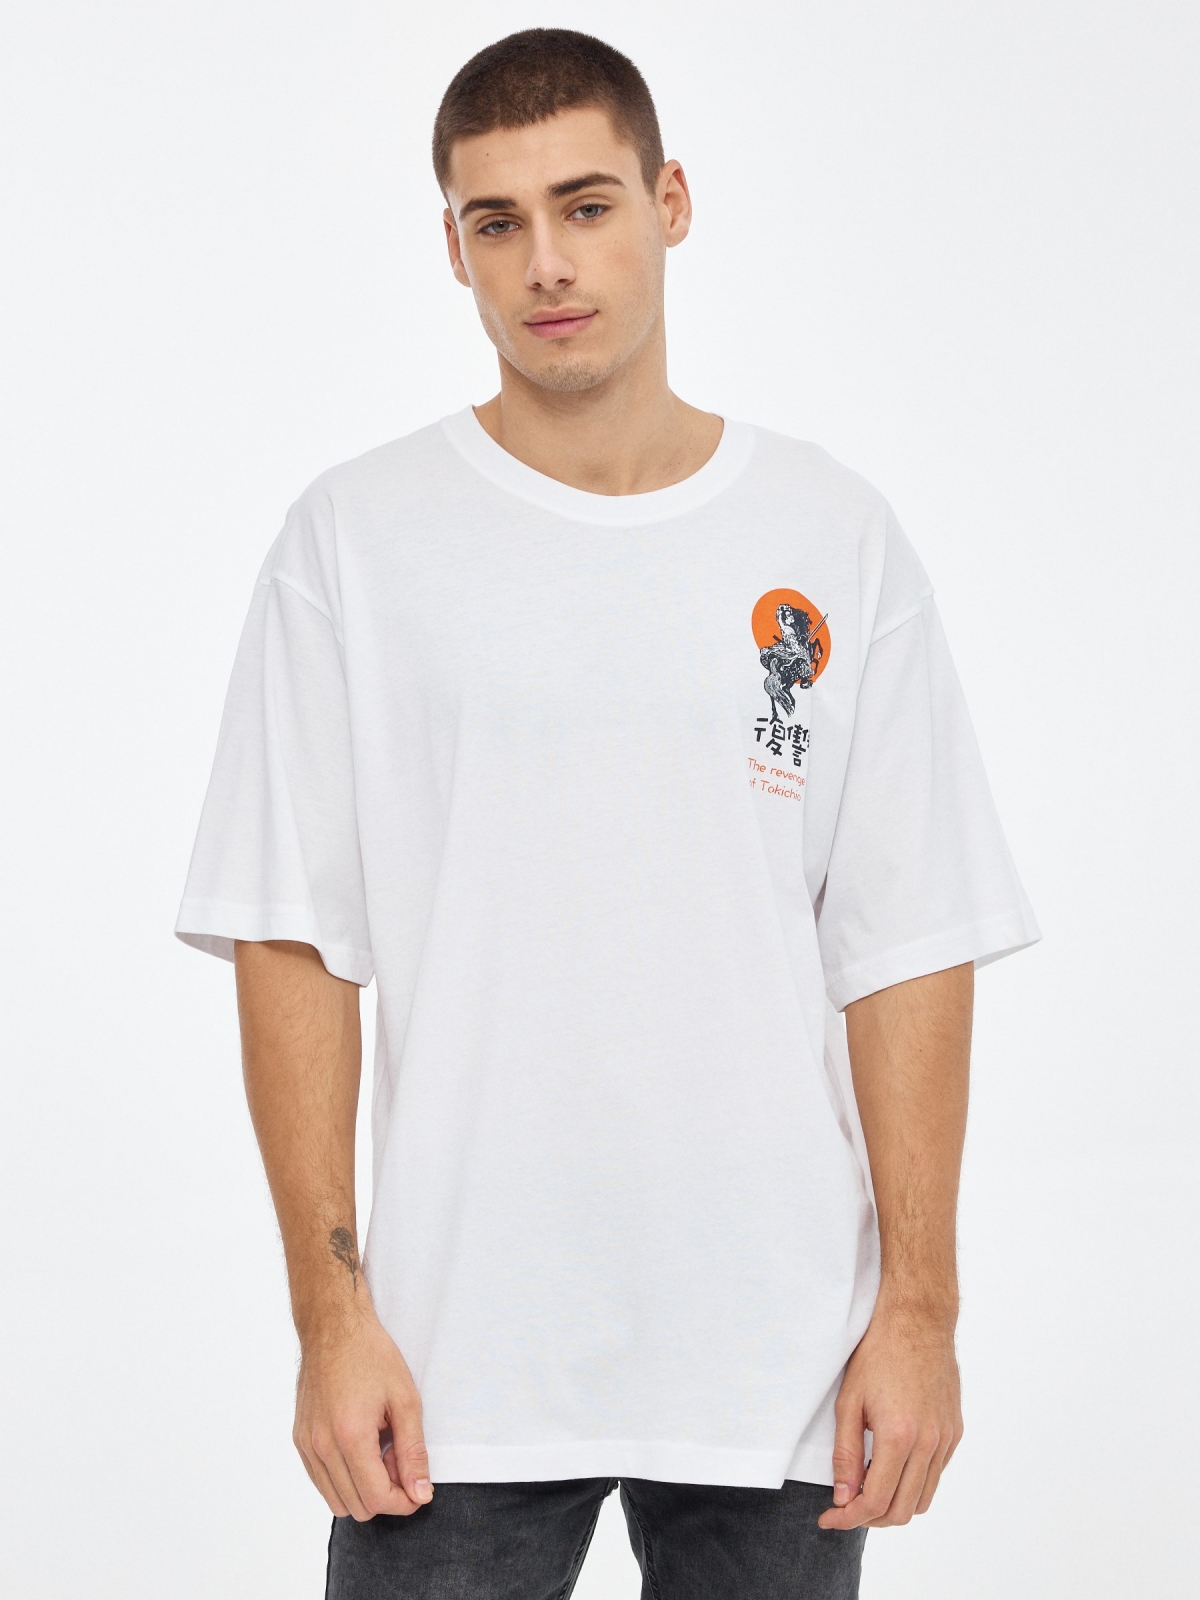 Japanese printed T-shirt white middle front view